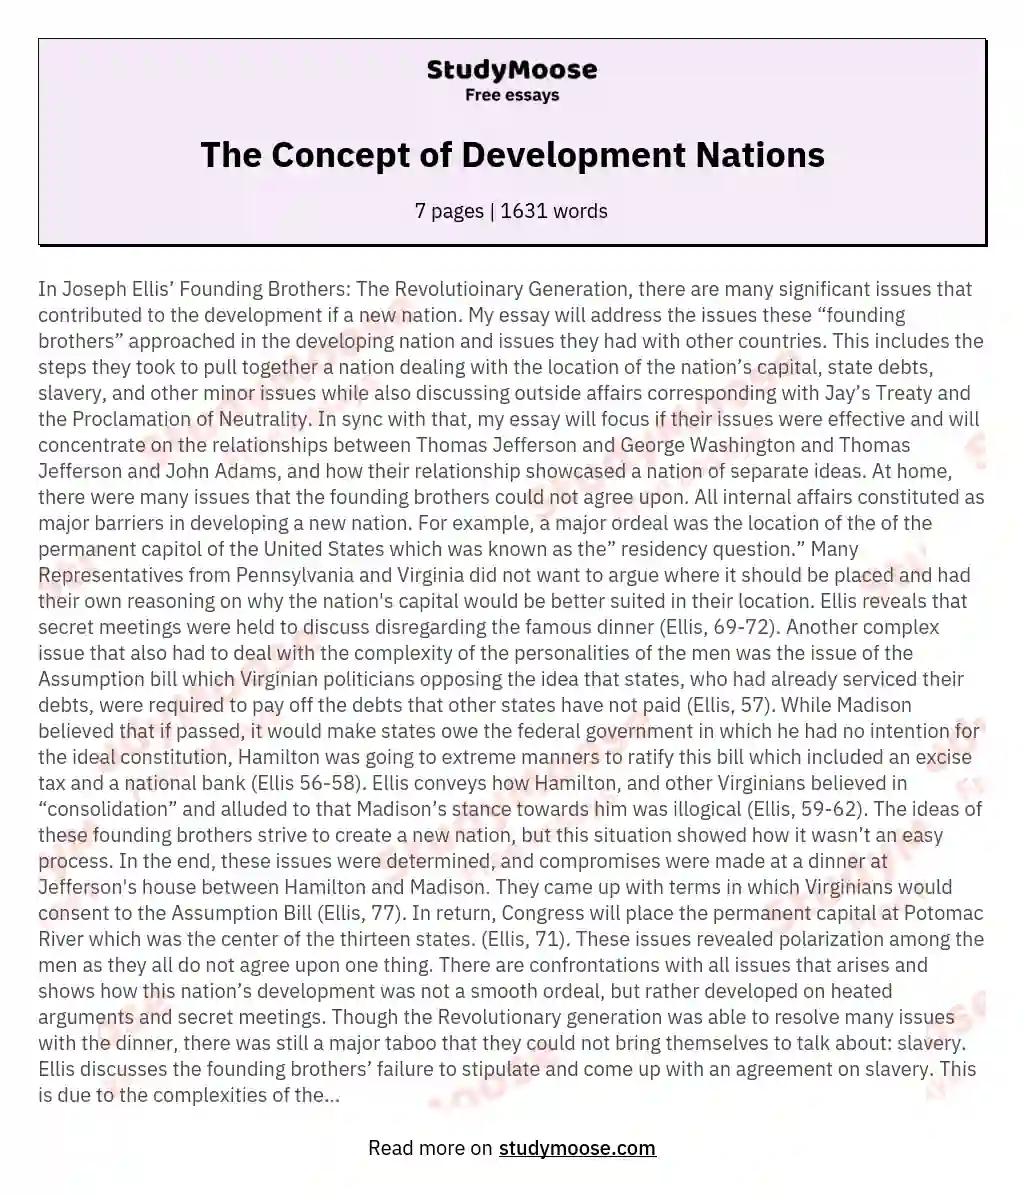 The Concept of Development Nations essay